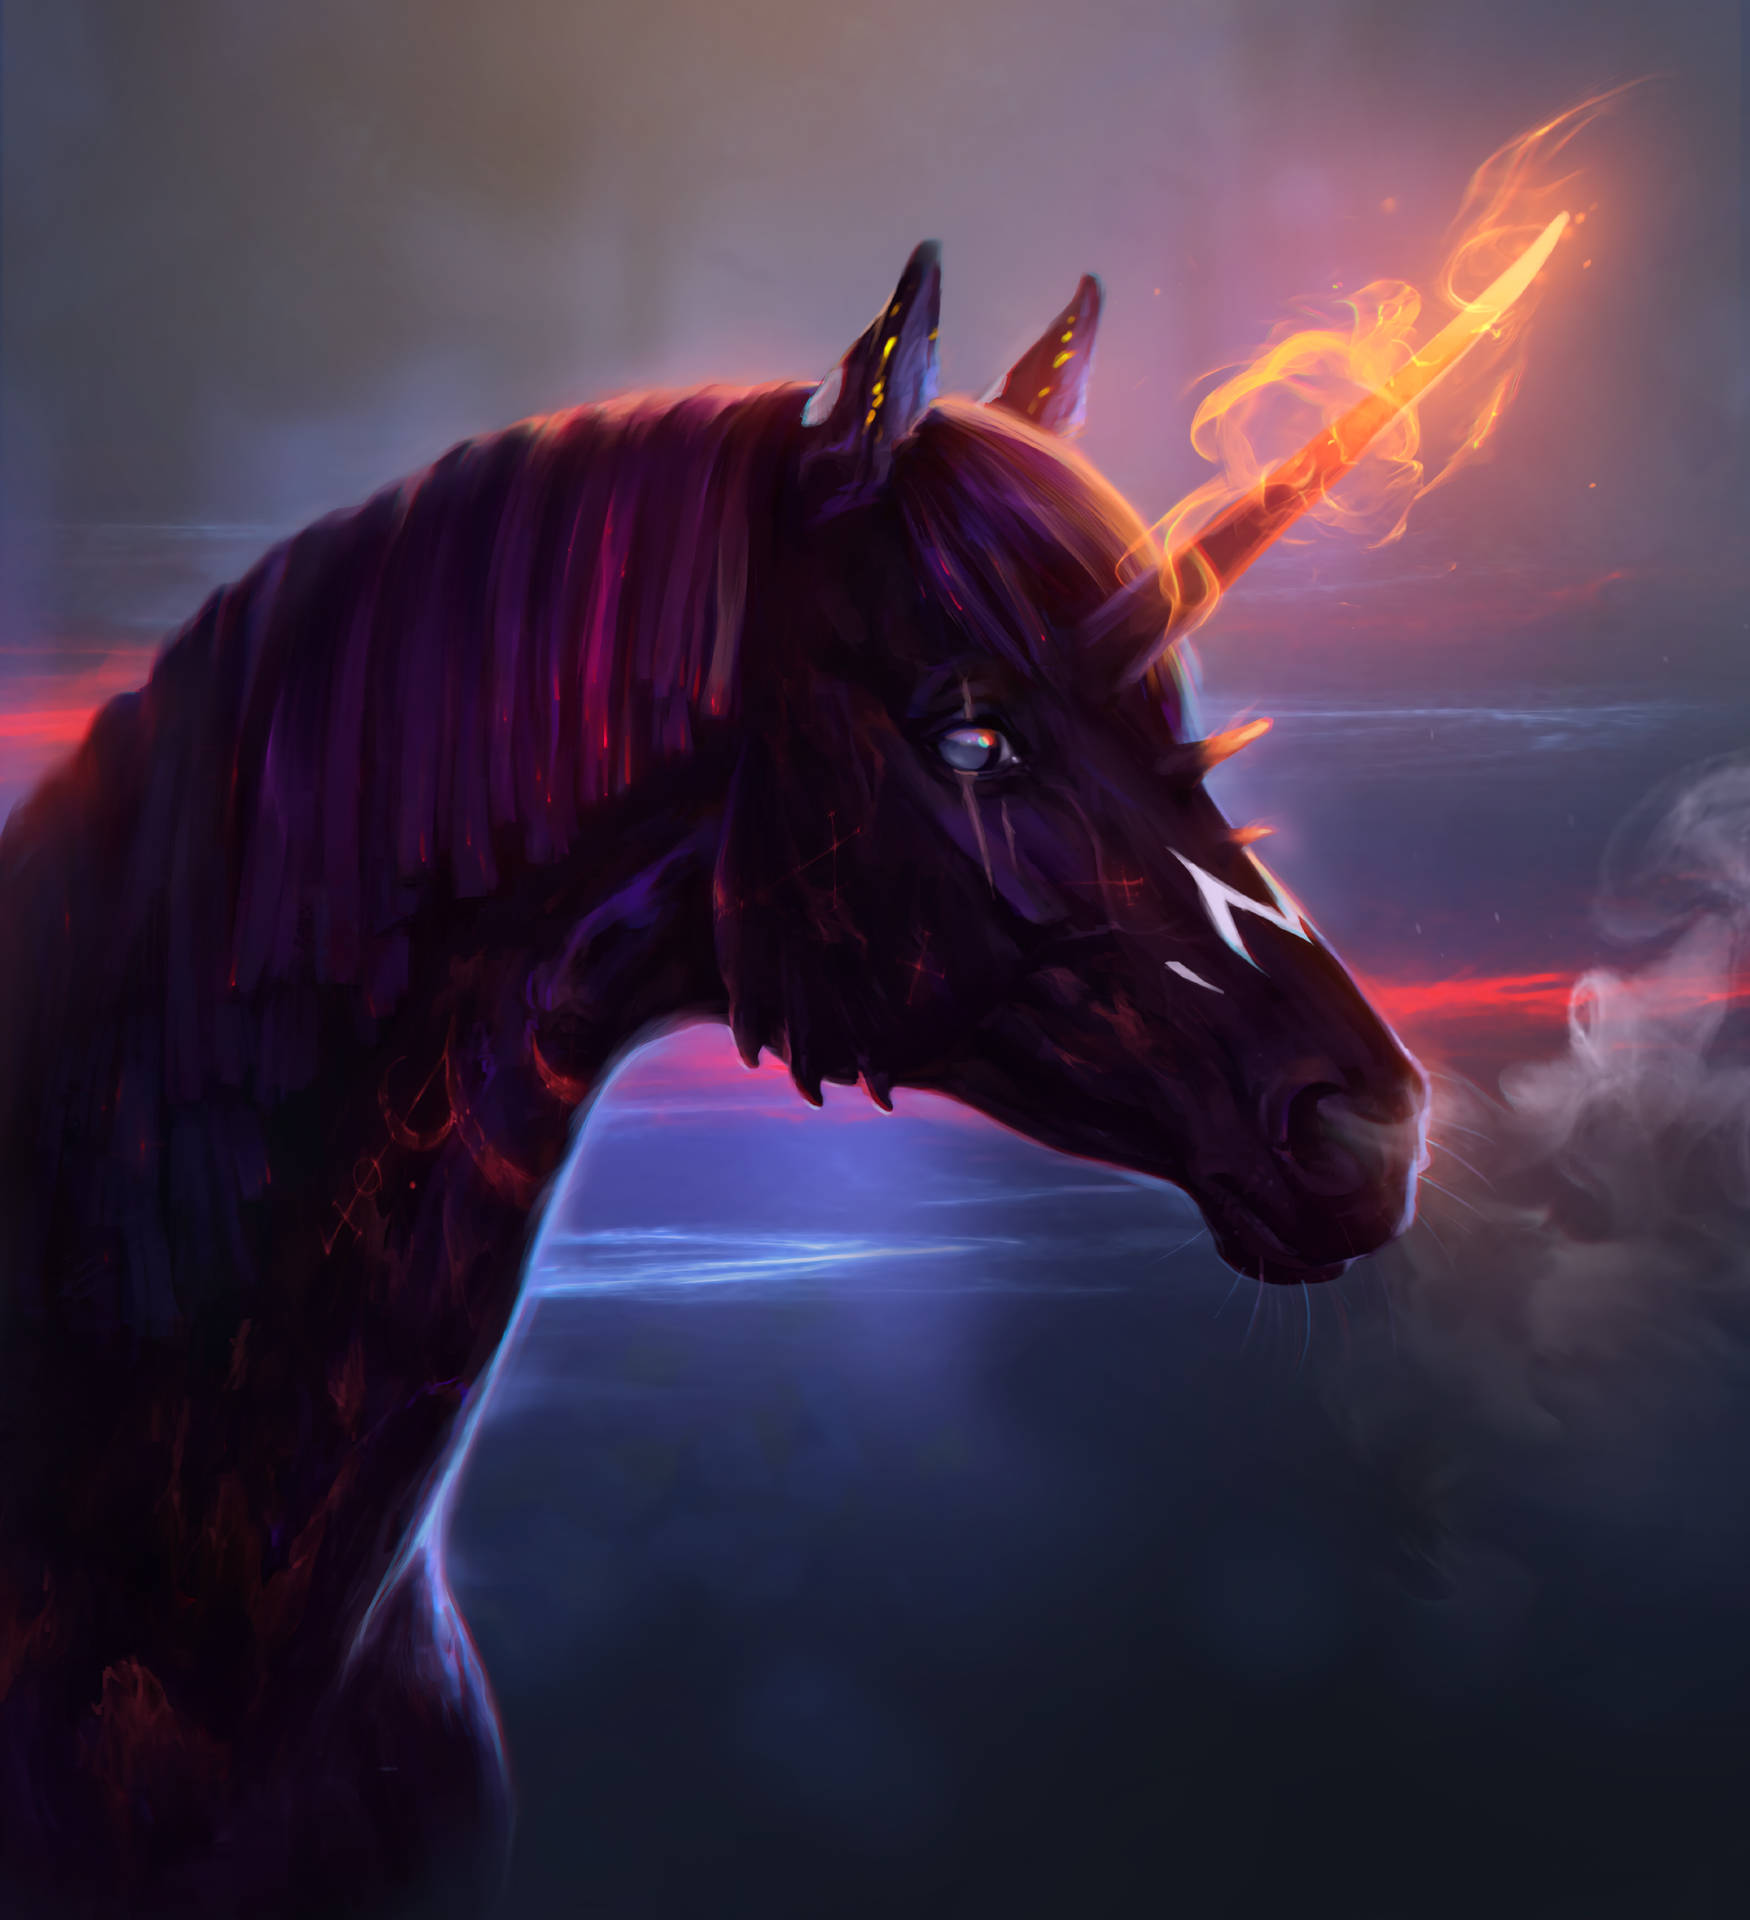 A mystical Unicorn surrounded by fire Wallpaper